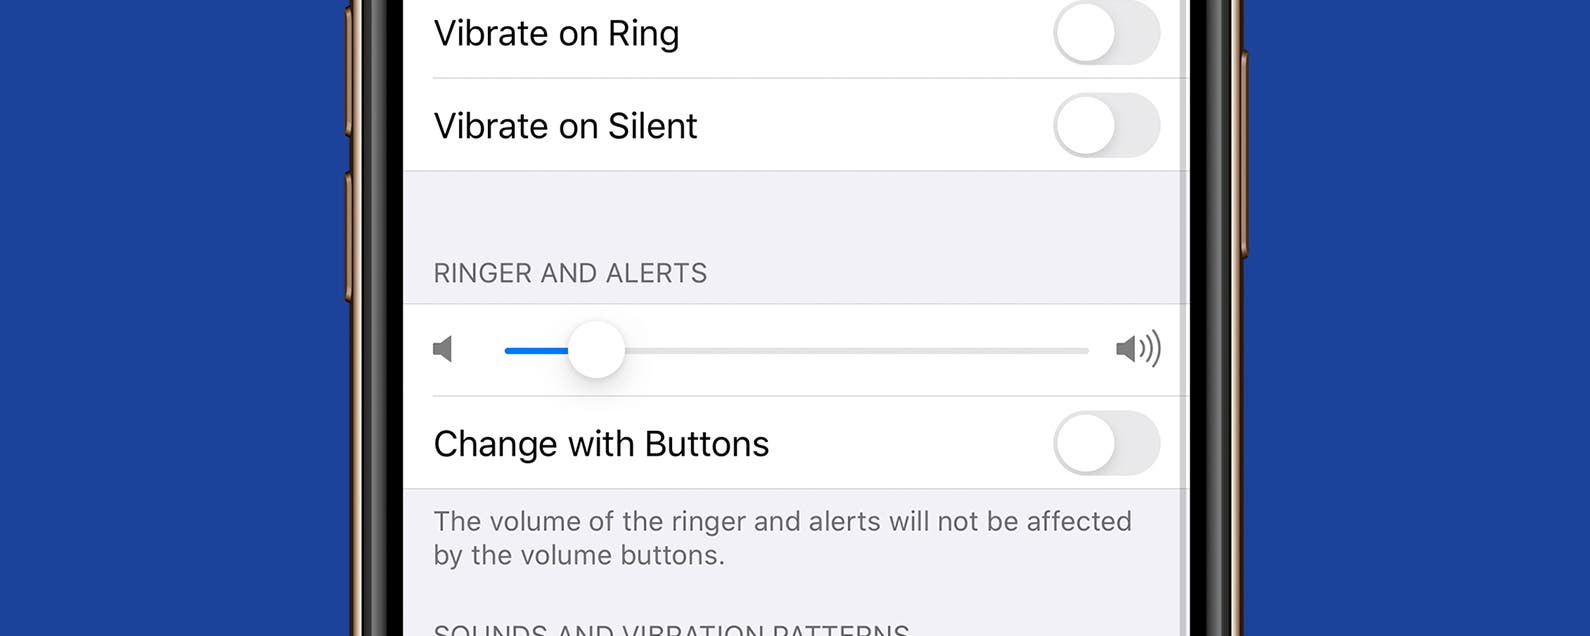 How to Change the Alarm Volume on Your iPhone